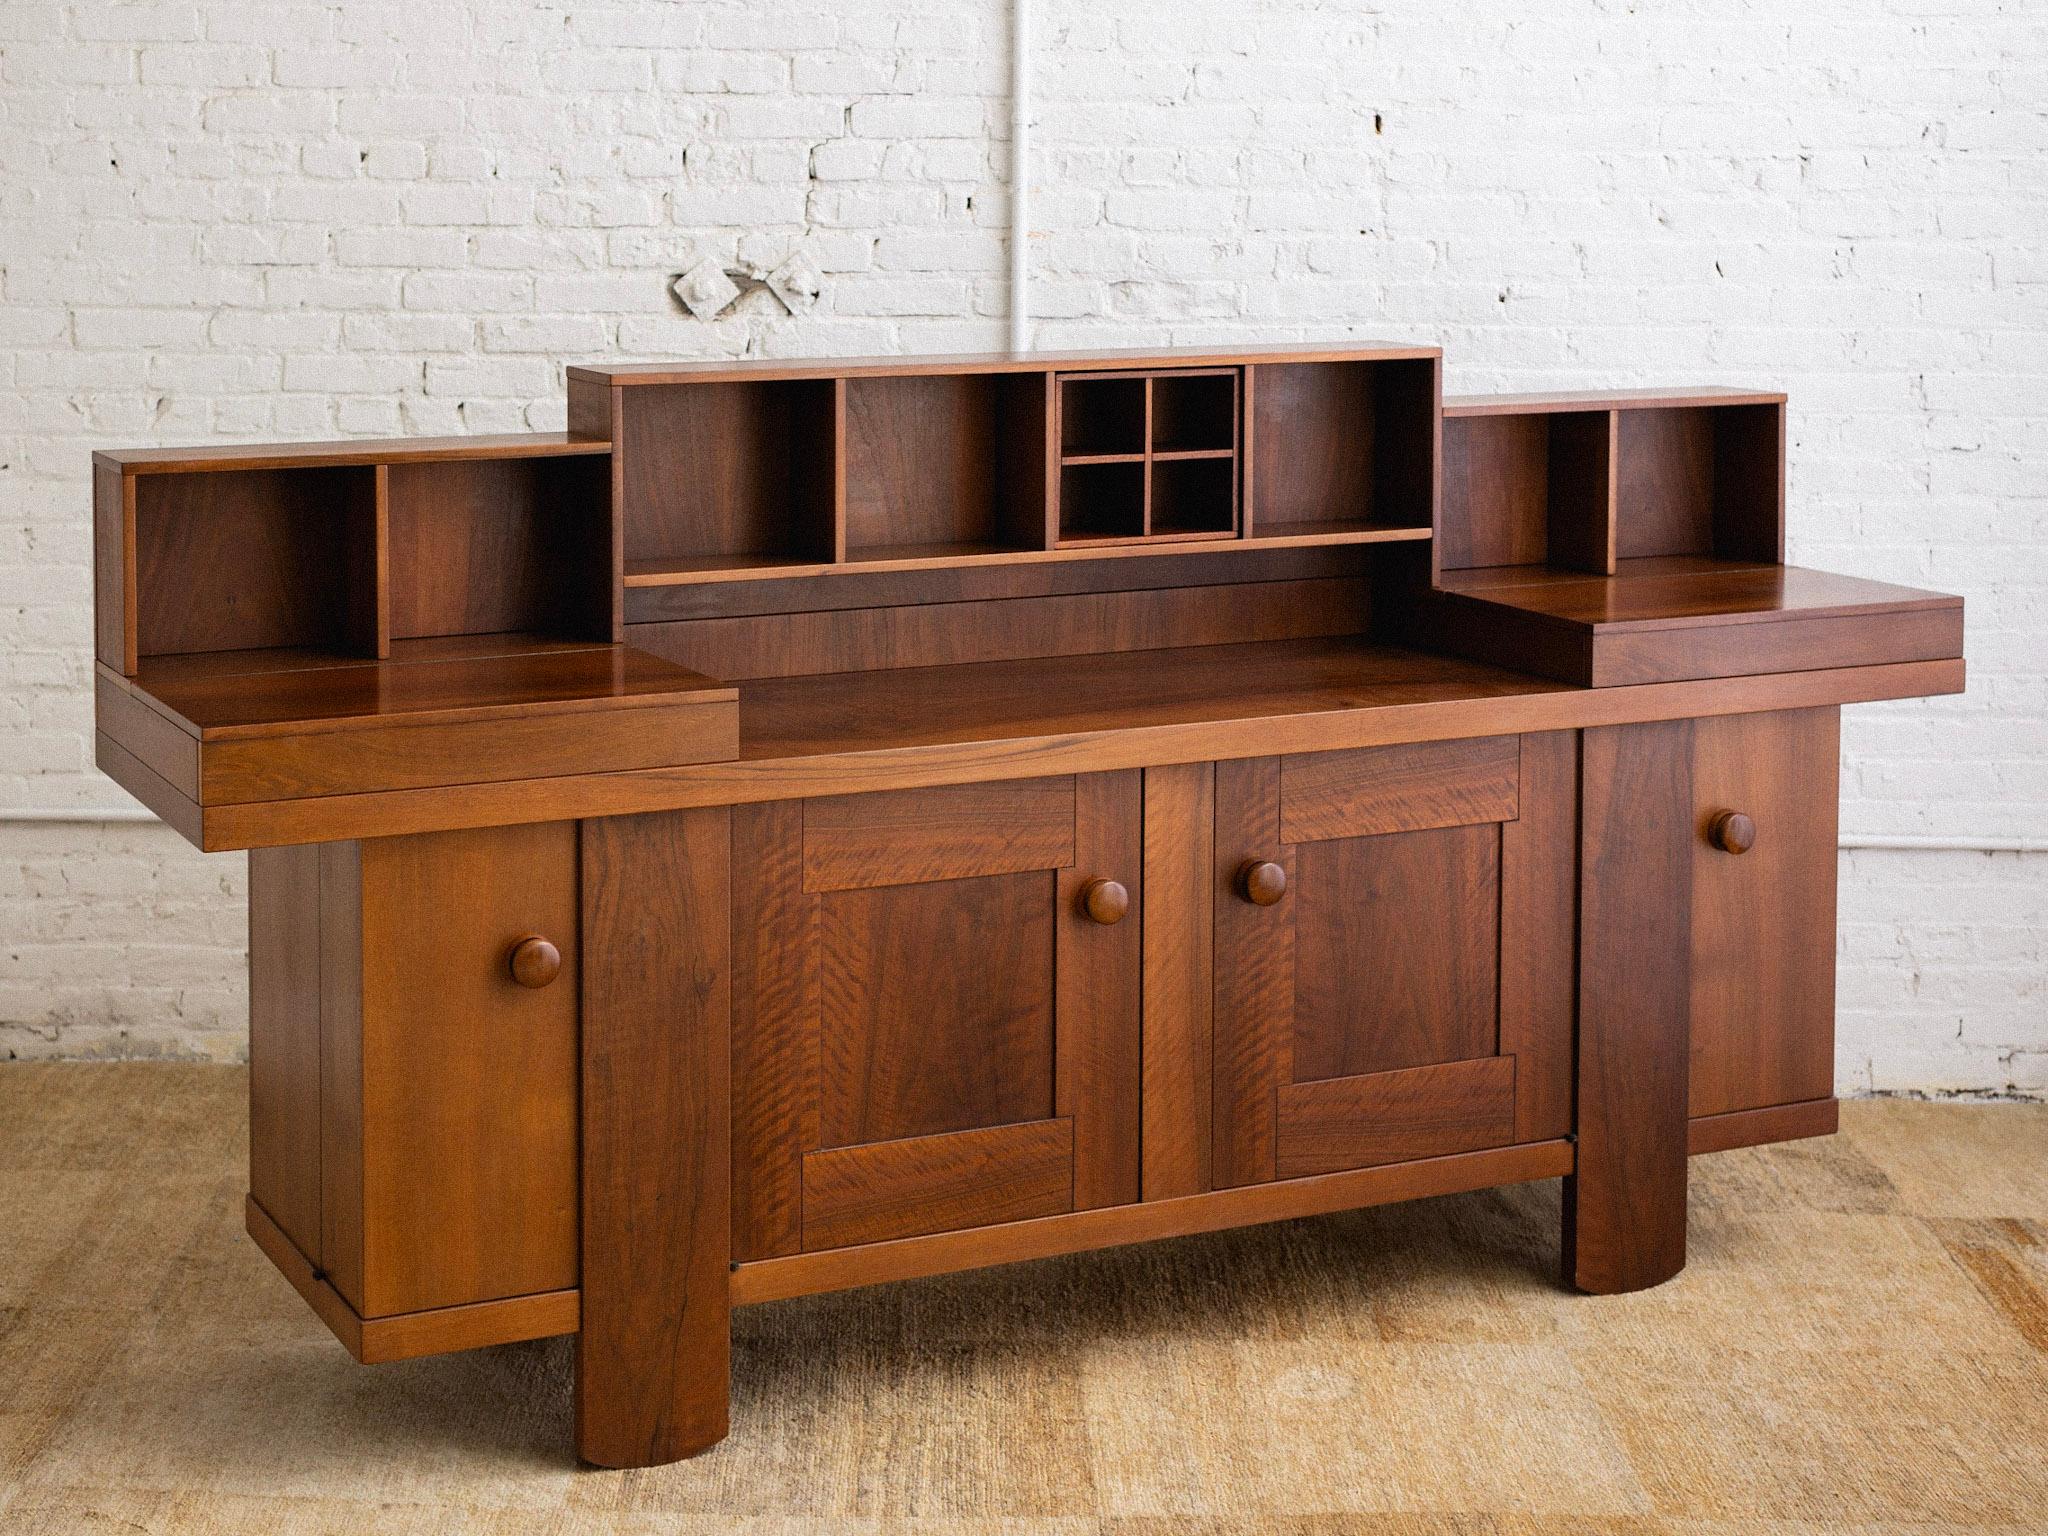 A midcentury Italian sideboard by Silvio Coppola for Bernini. Upper cupboards open to reveal removable trays. Lower cabinets feature adjustable shelves. Large wood pulls and a rich walnut finish. Sourced in Northern Italy. Upper shelving removes for